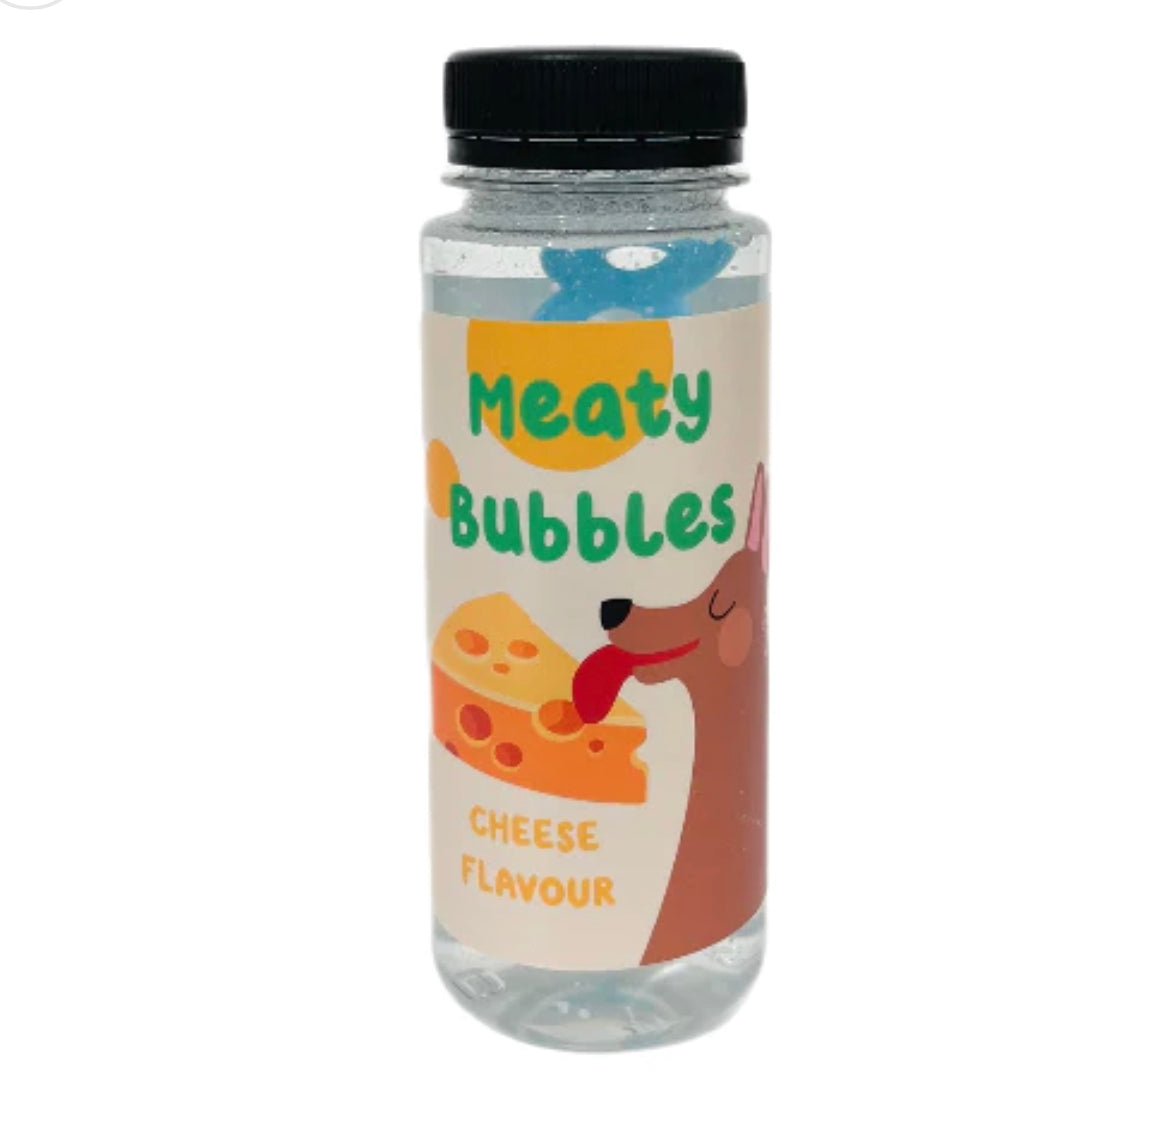 Meaty Bubbles - Cheese Flavour